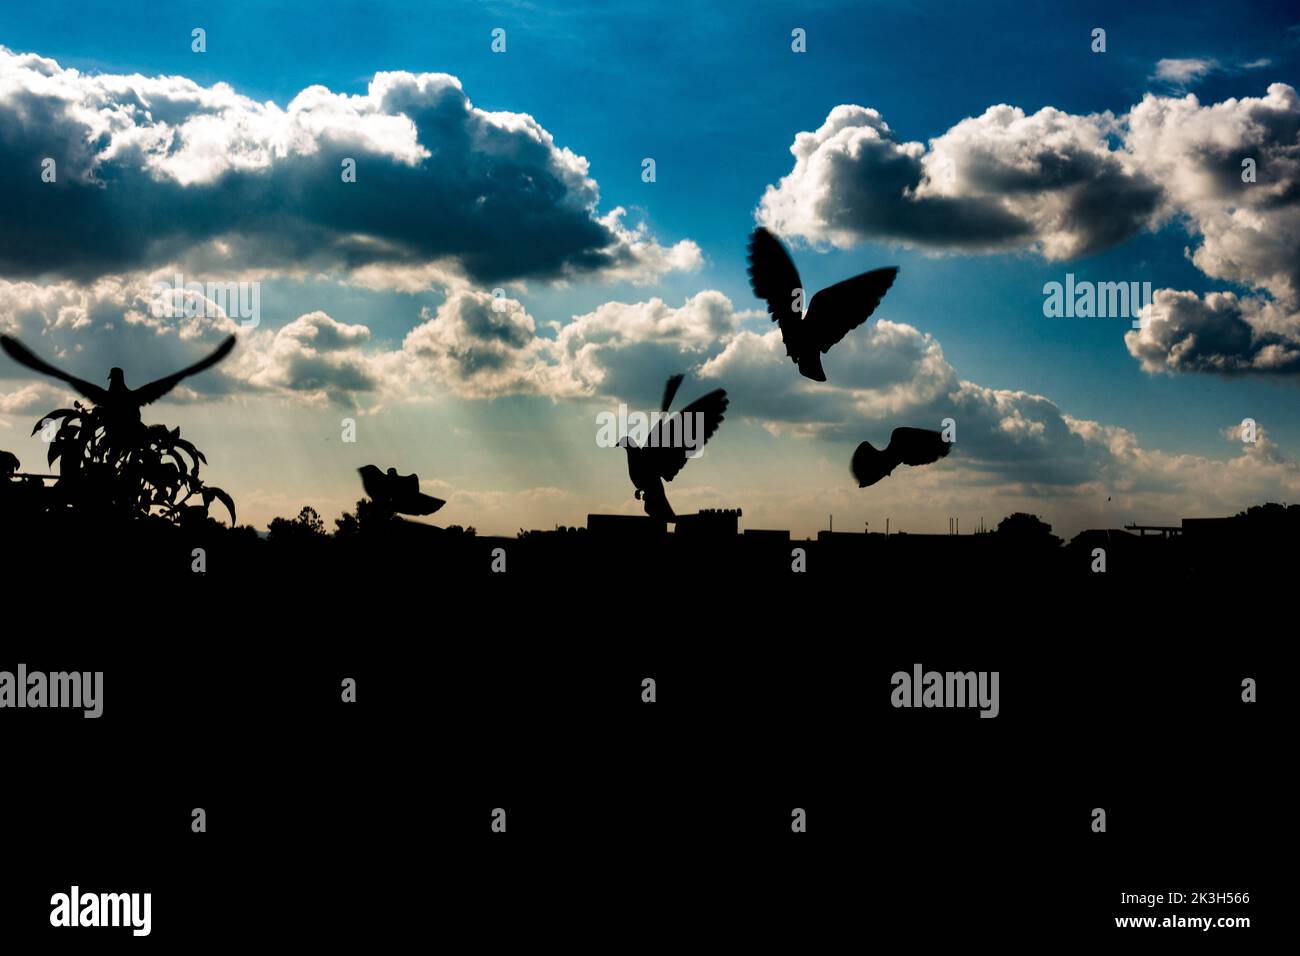 Artistic Silhouette of flying Pigeons with blue sky with white clouds in the background. Uttarakhand India. Stock Photo